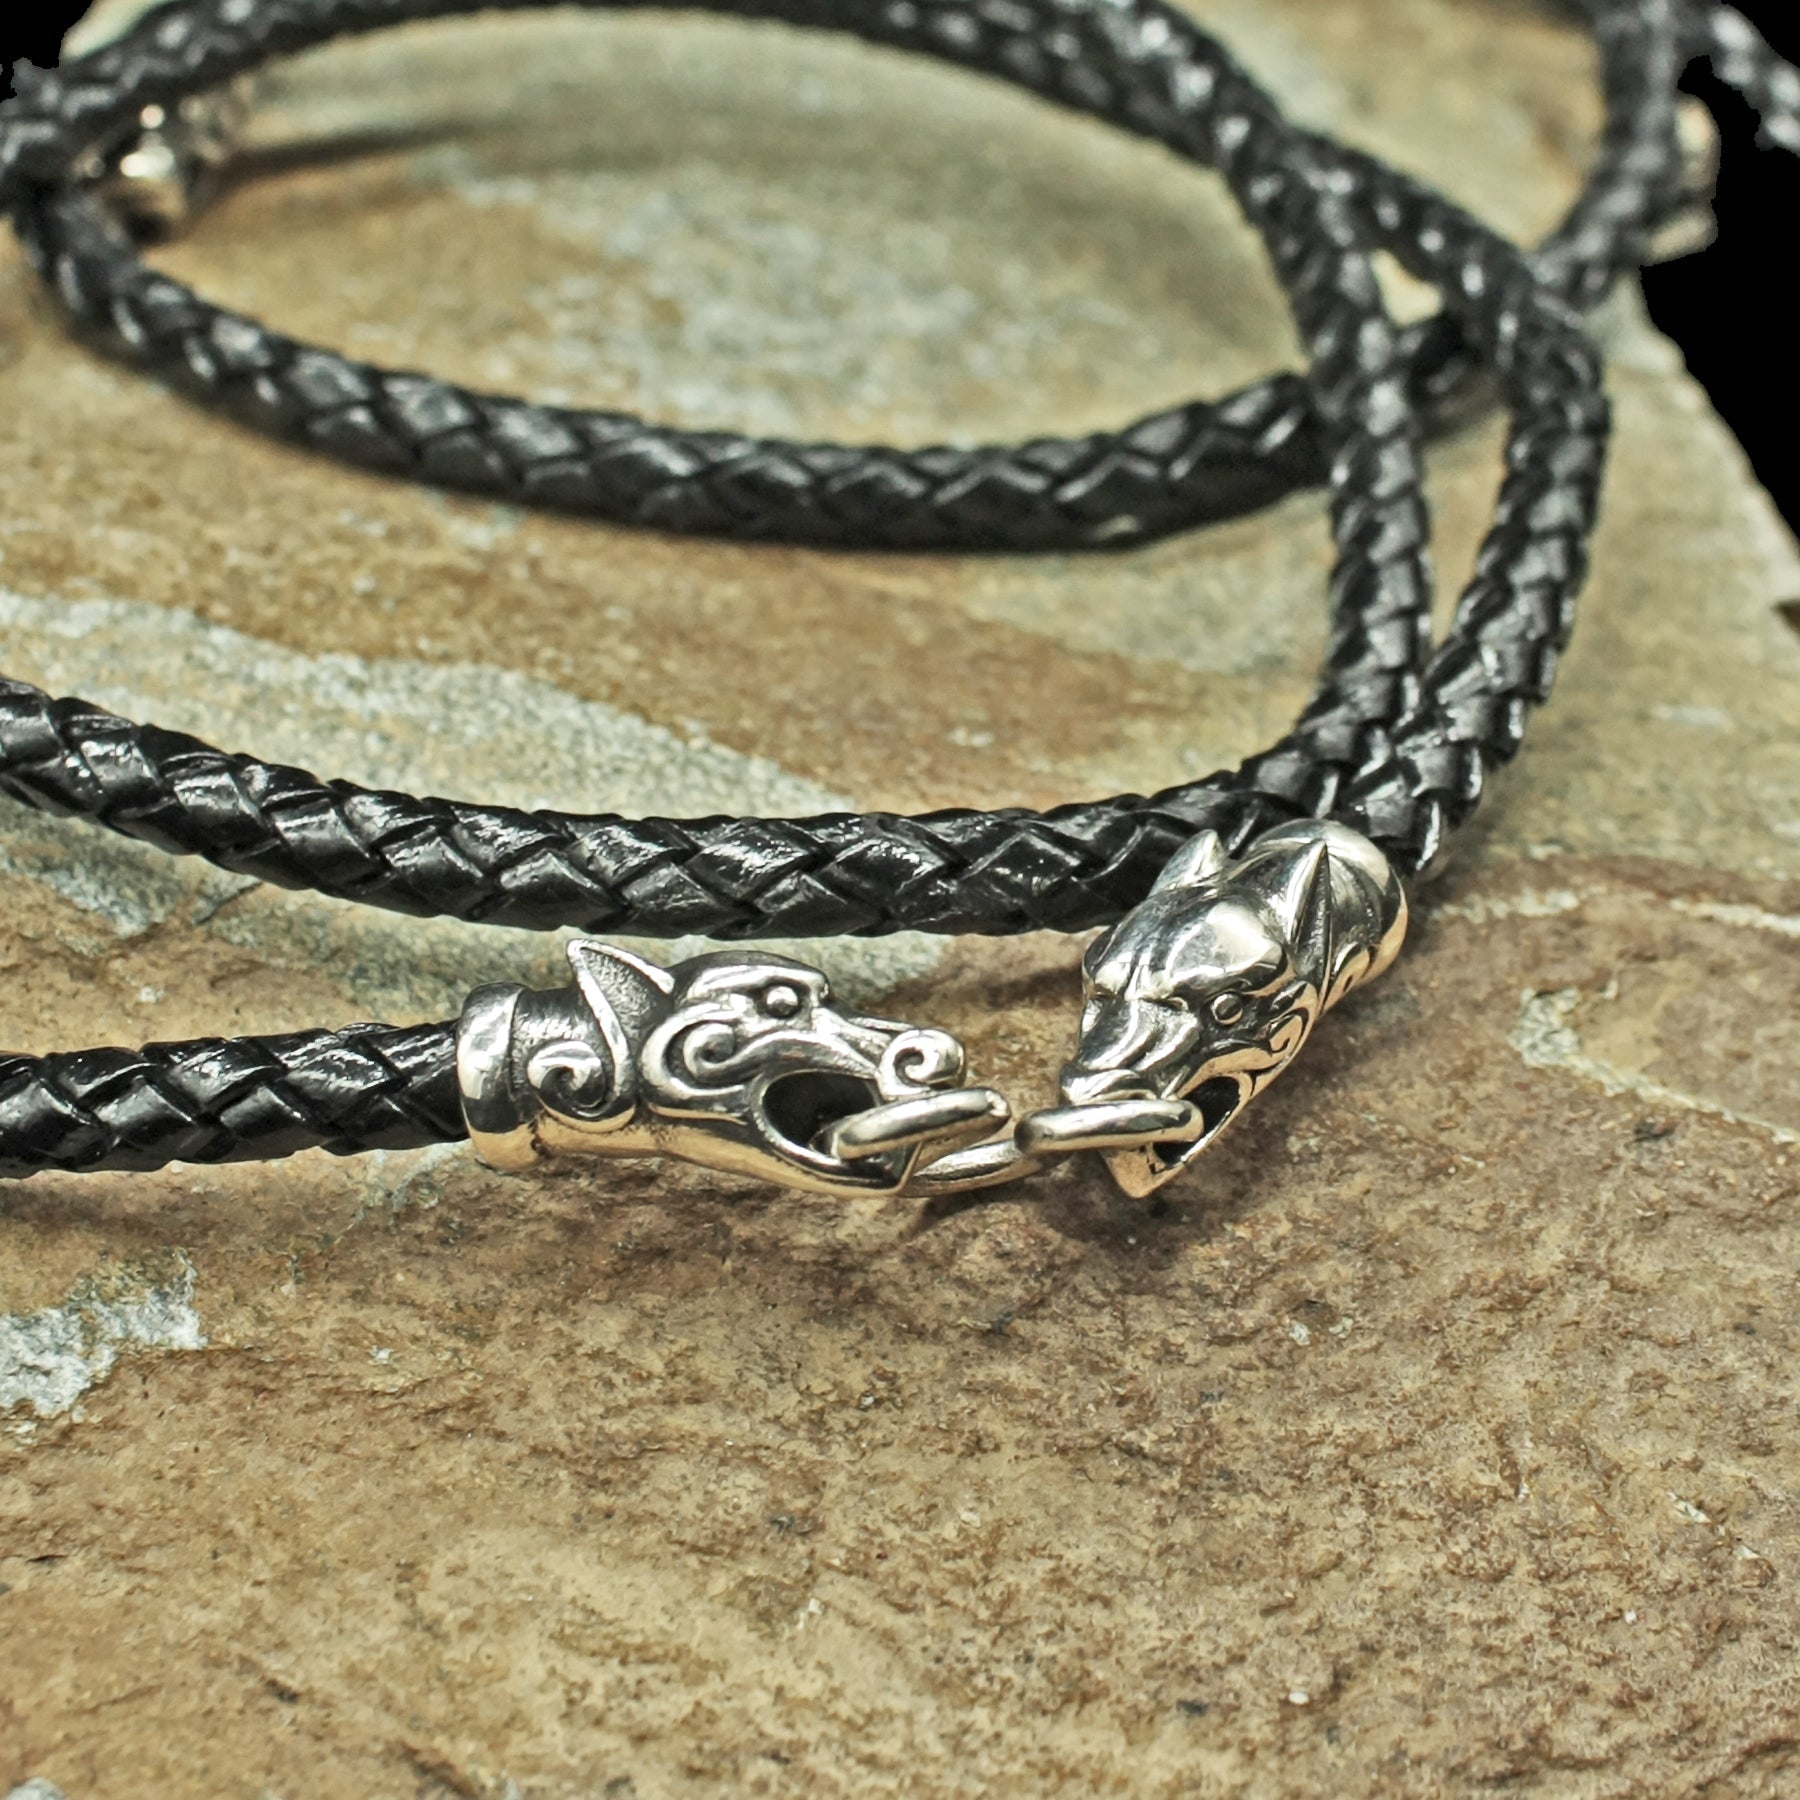 5mm braided leather necklace silver ferocious wolf heads